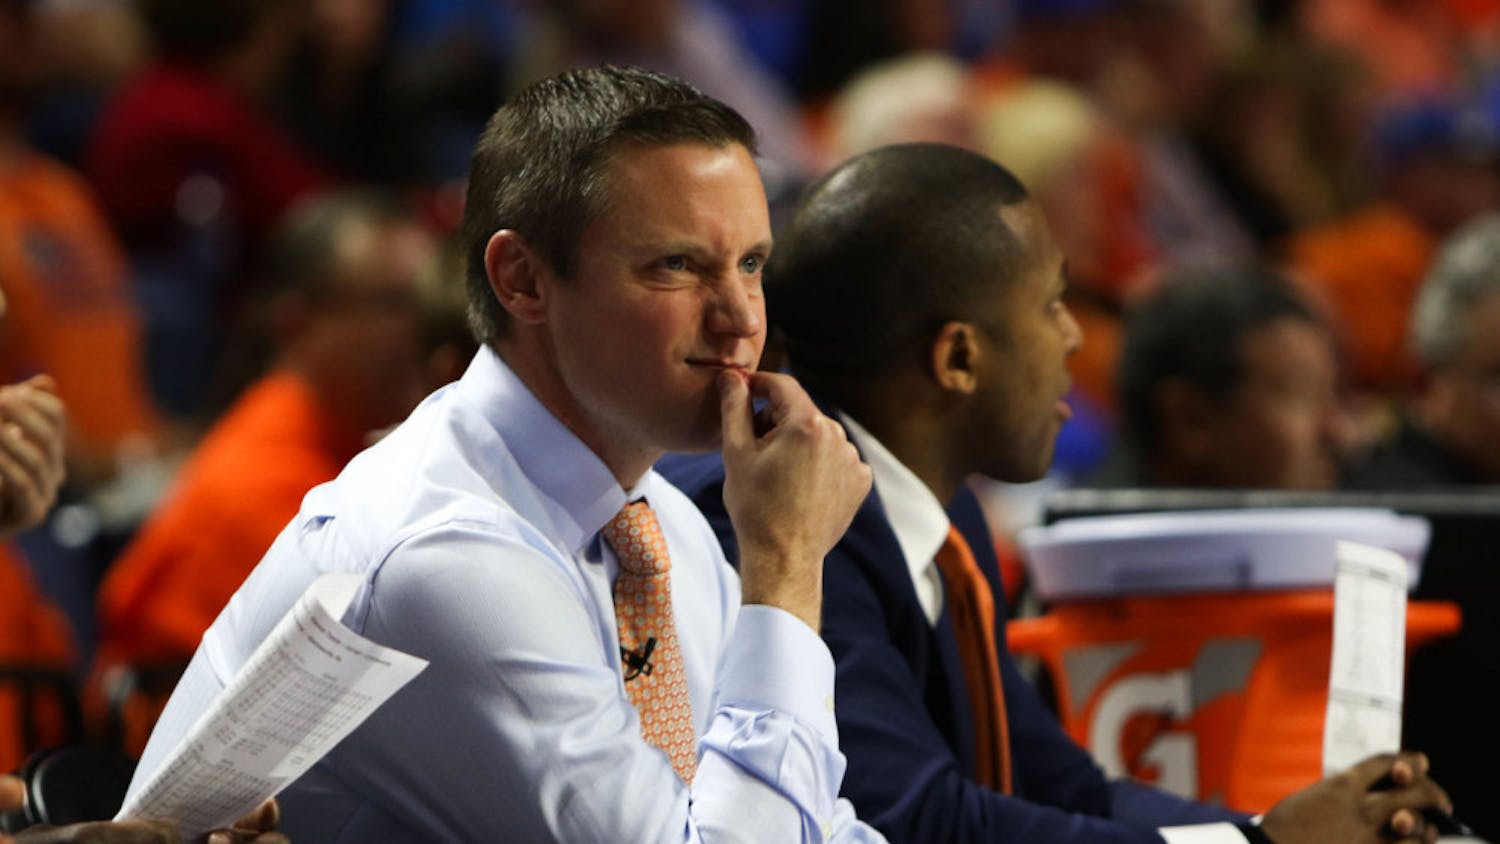 Men’s basketball coach Mike White and the Gators are in the middle of one of the worst offensive seasons in the past 20 years. They are averaging 68.7 points a game, the second lowest in that span.
&nbsp;